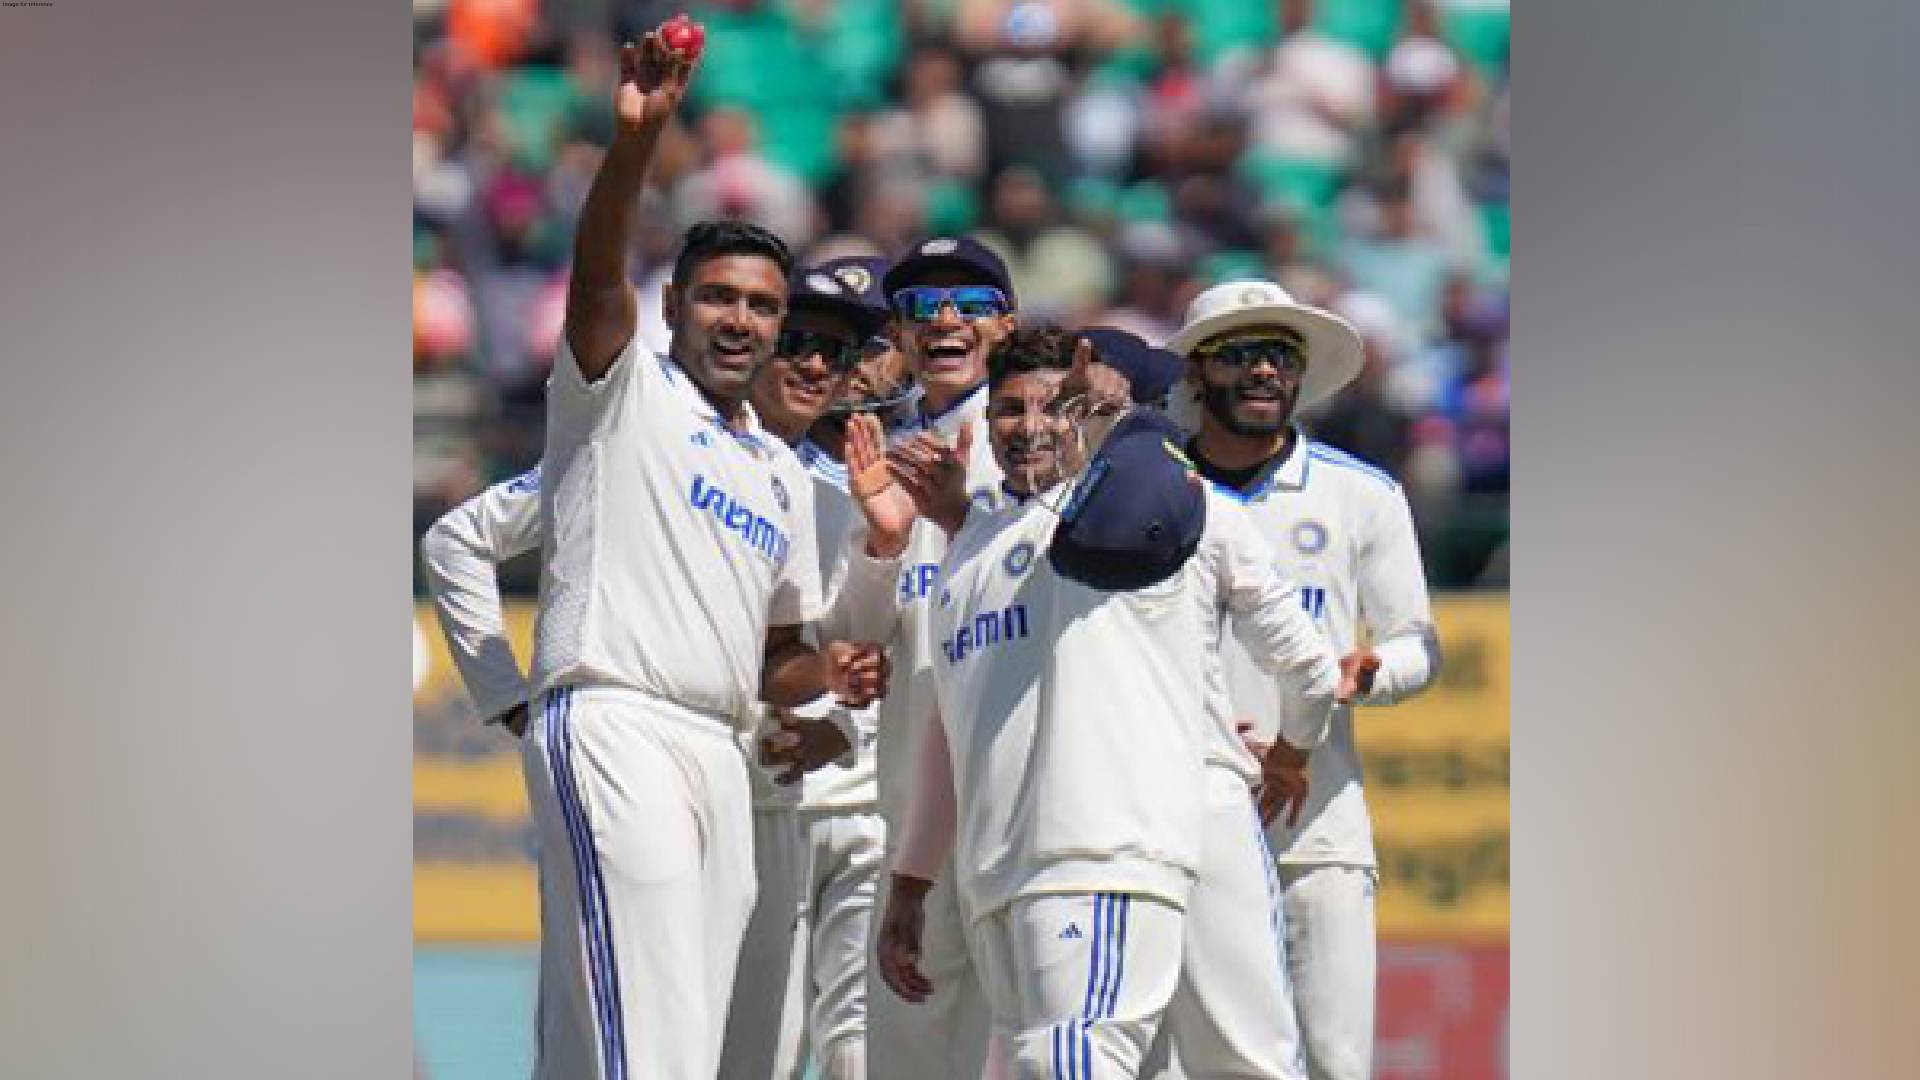 'Bazball' handed one final blow as Ashwin's fifer helps India beat England by innings and 64 runs in 5th Test